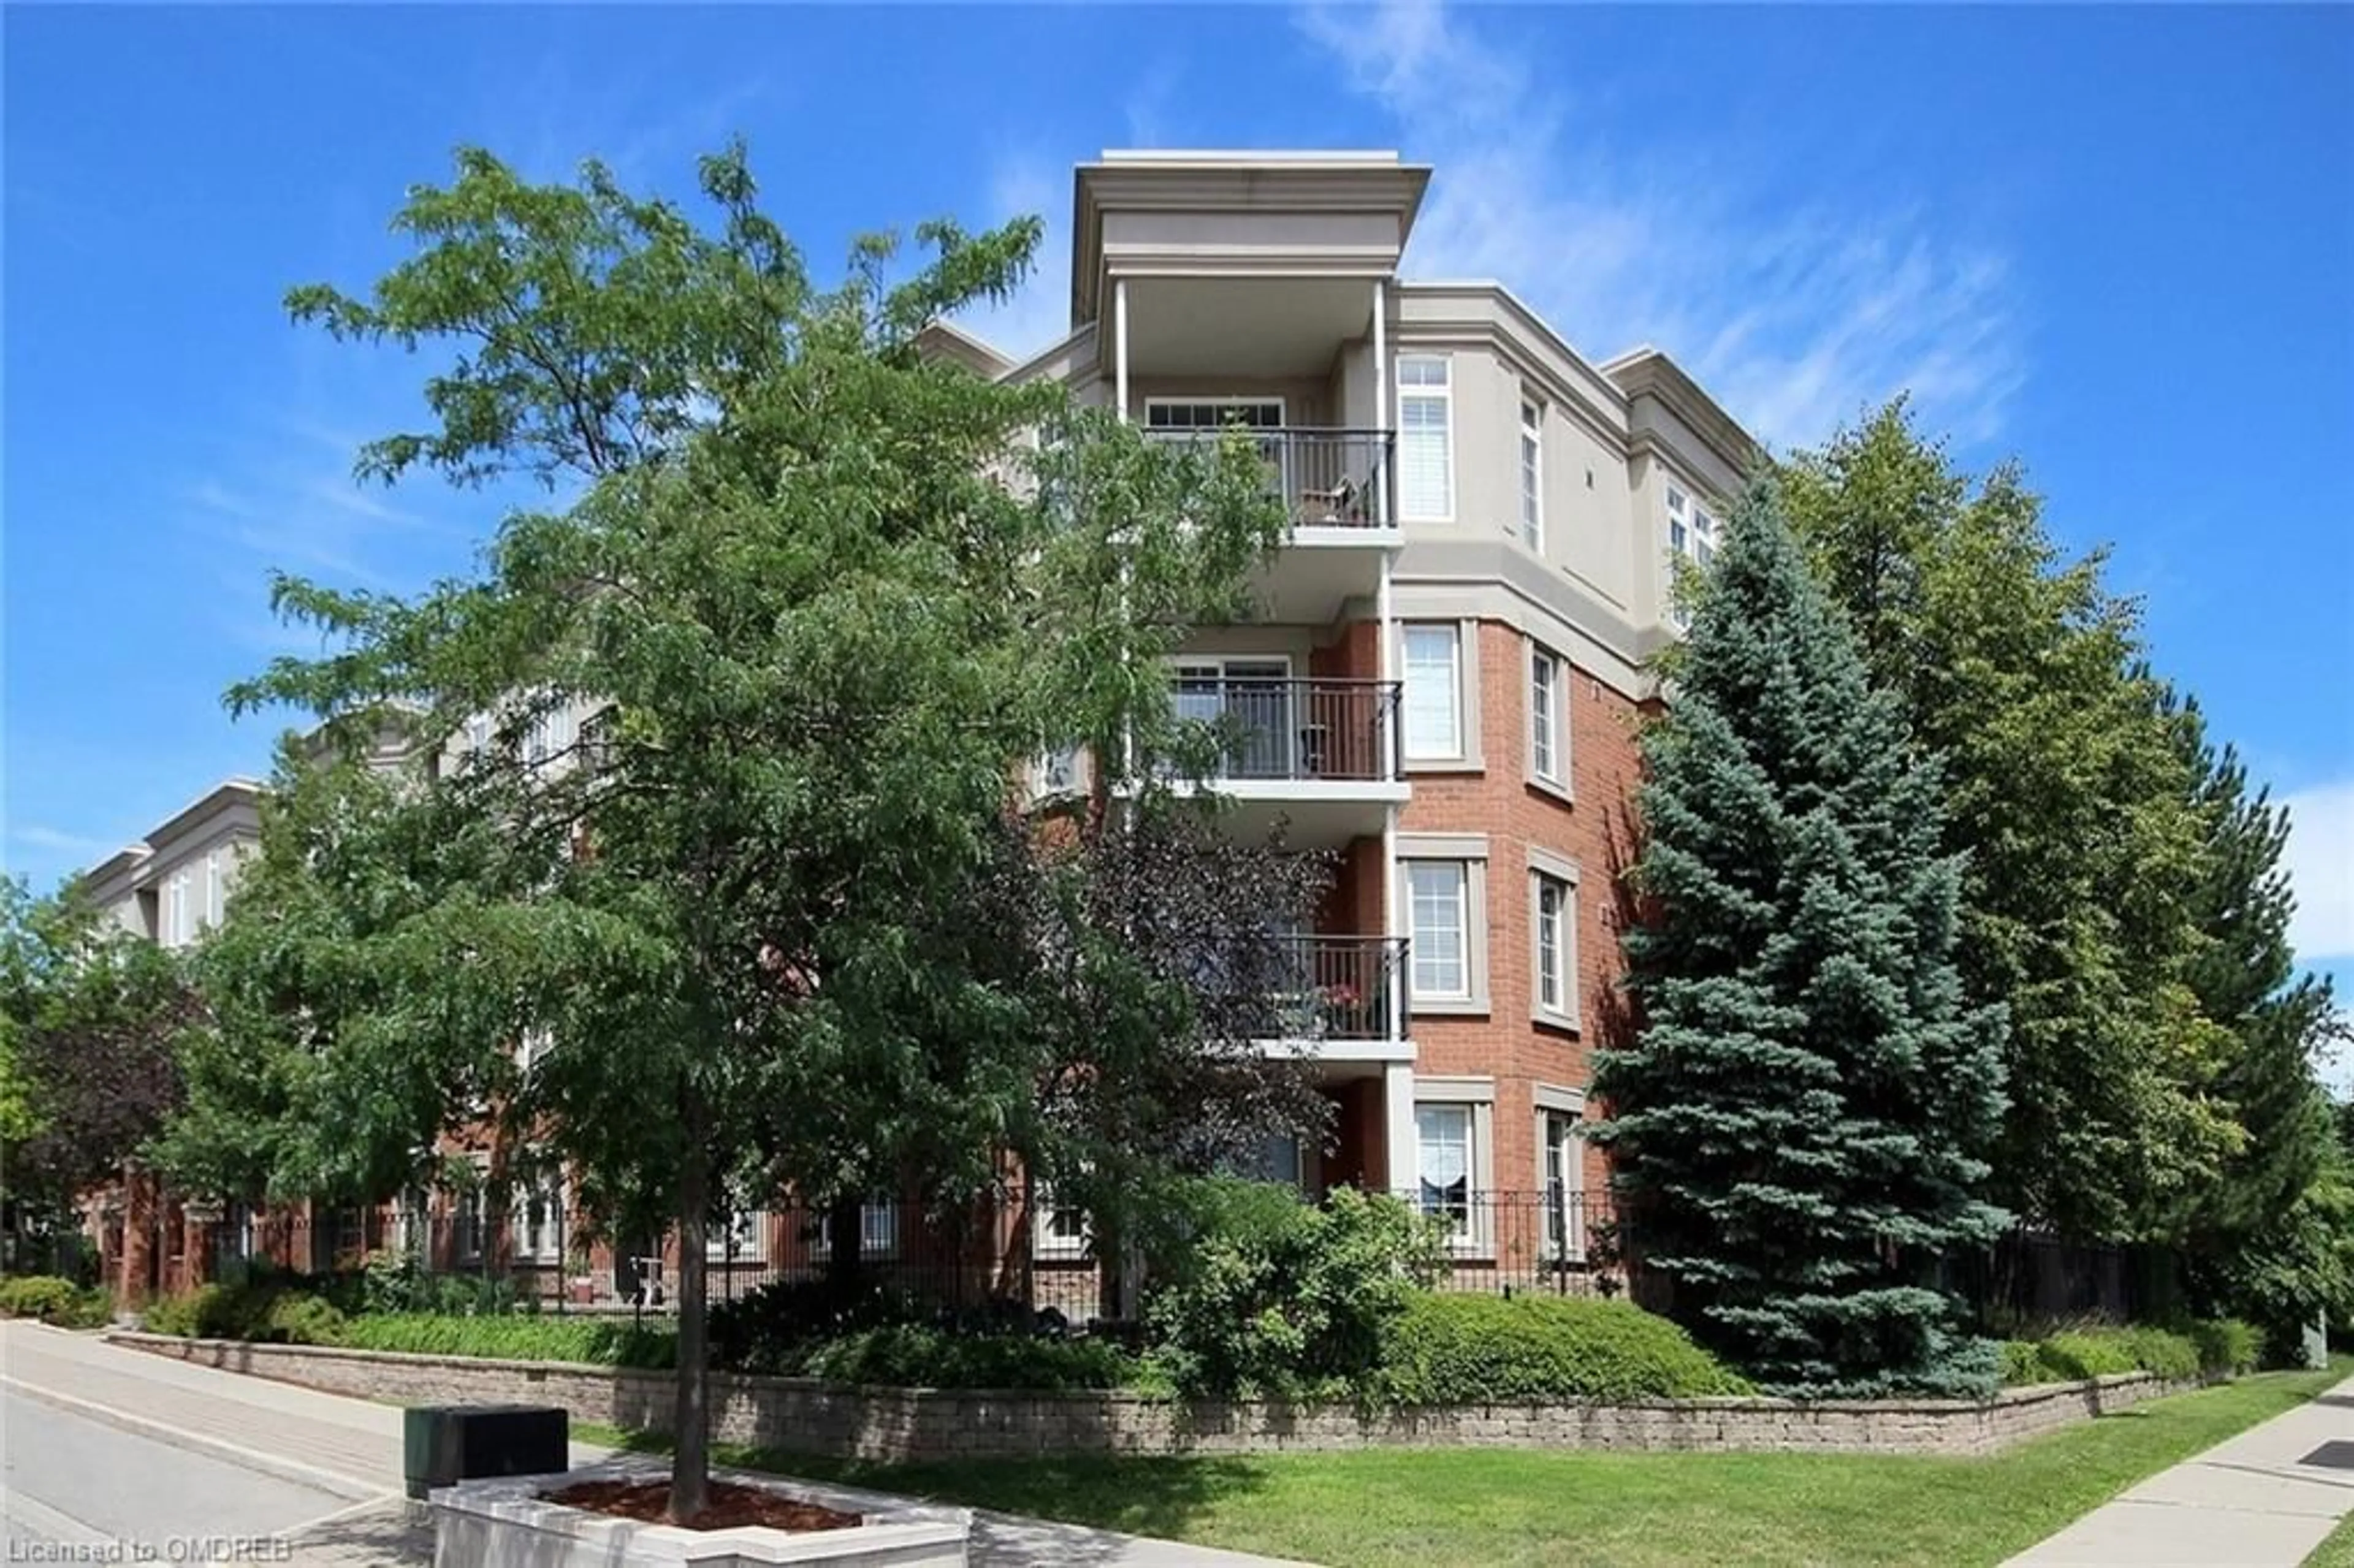 A pic from exterior of the house or condo for 2301 Parkhaven Blvd #209, Oakville Ontario L6H 6V6